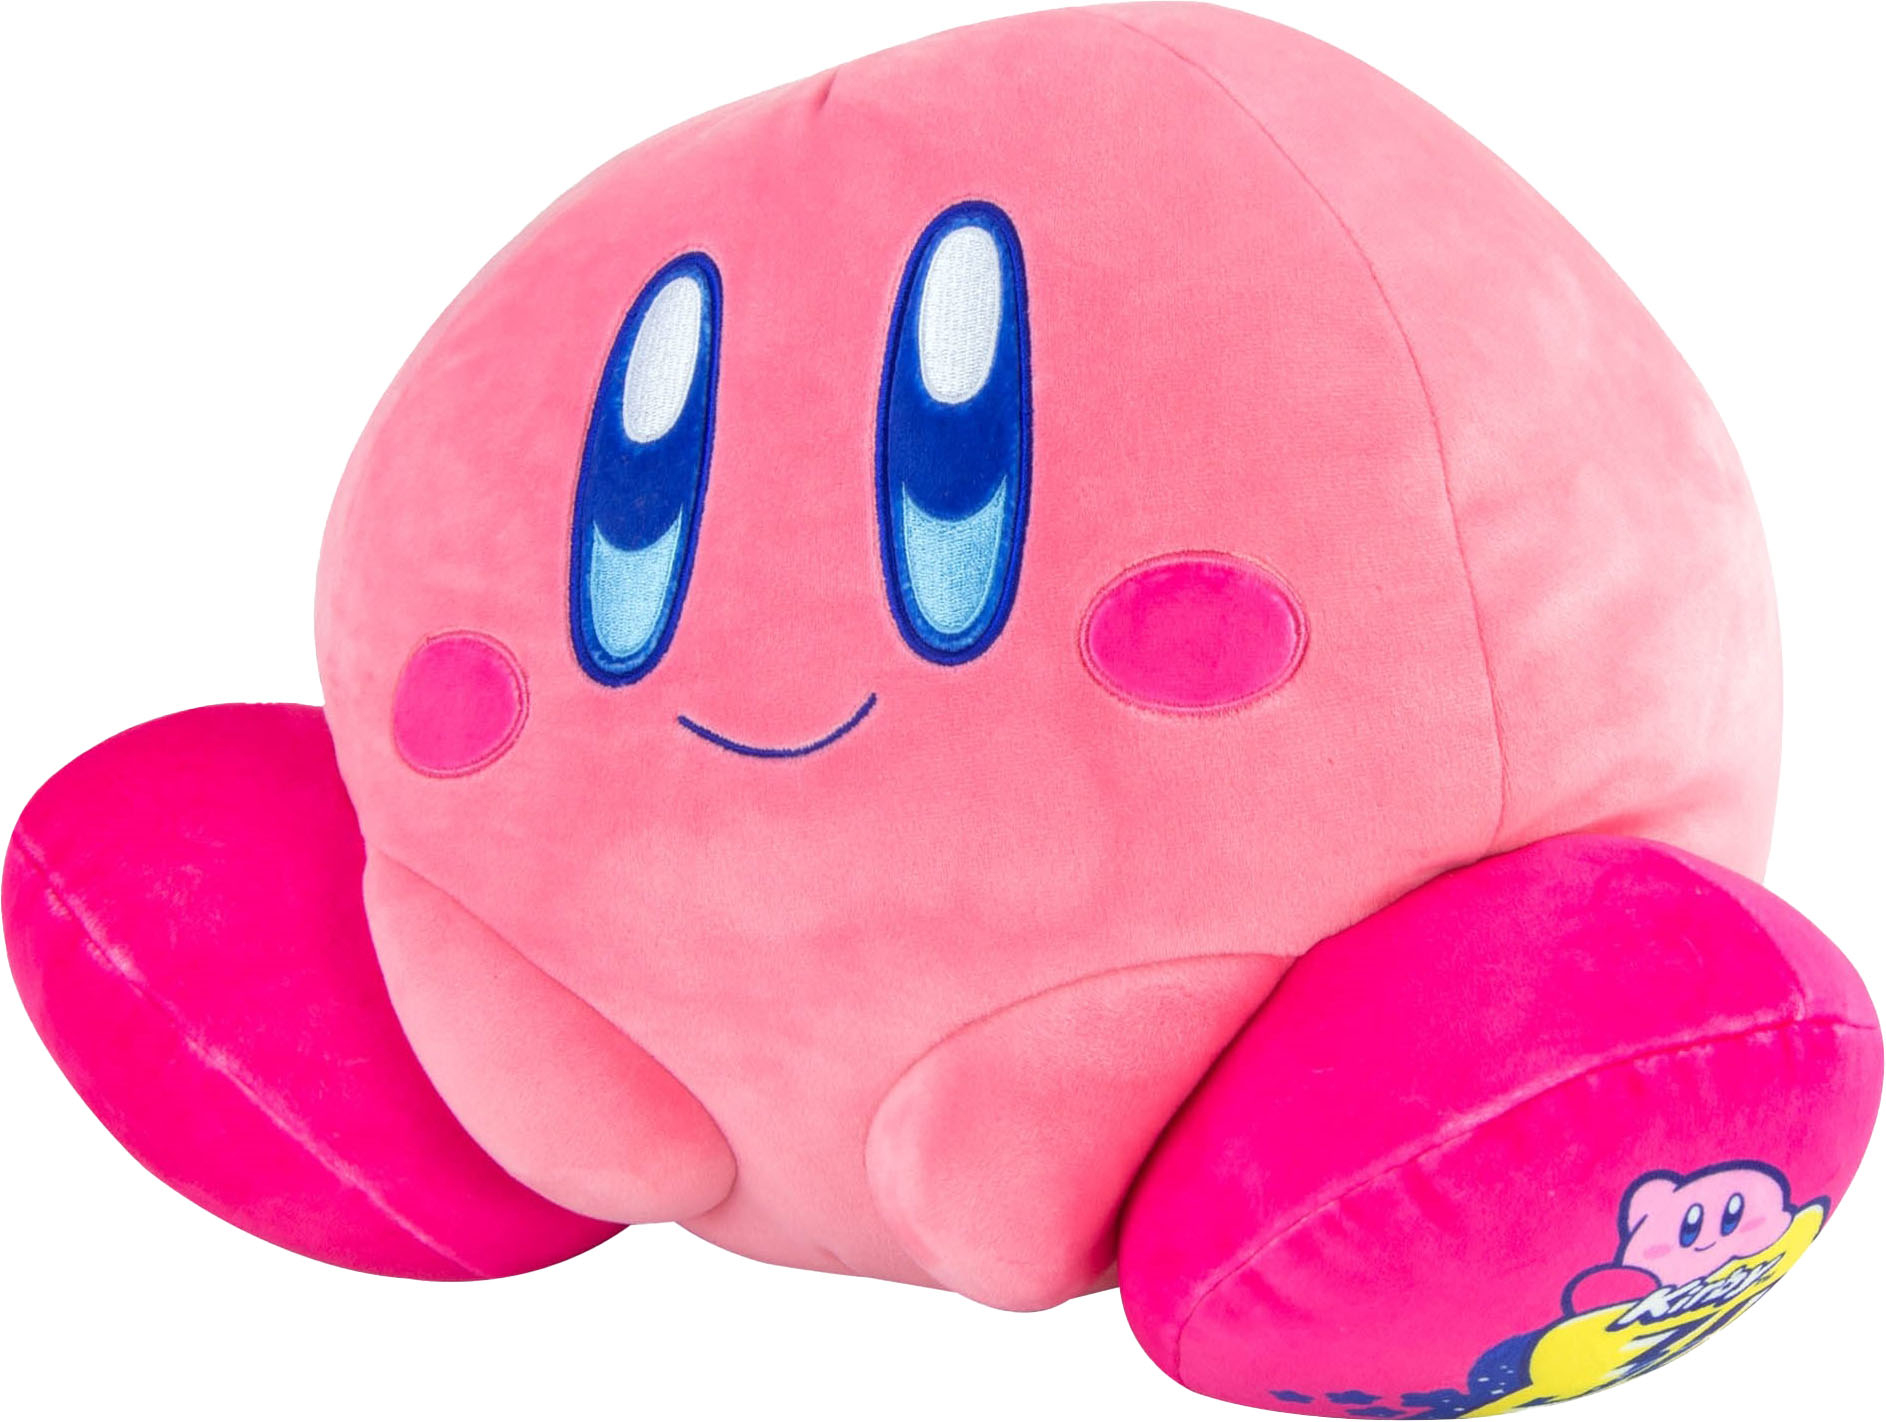 Nintendo Is Officially Done With Kirby's 30th Anniversary